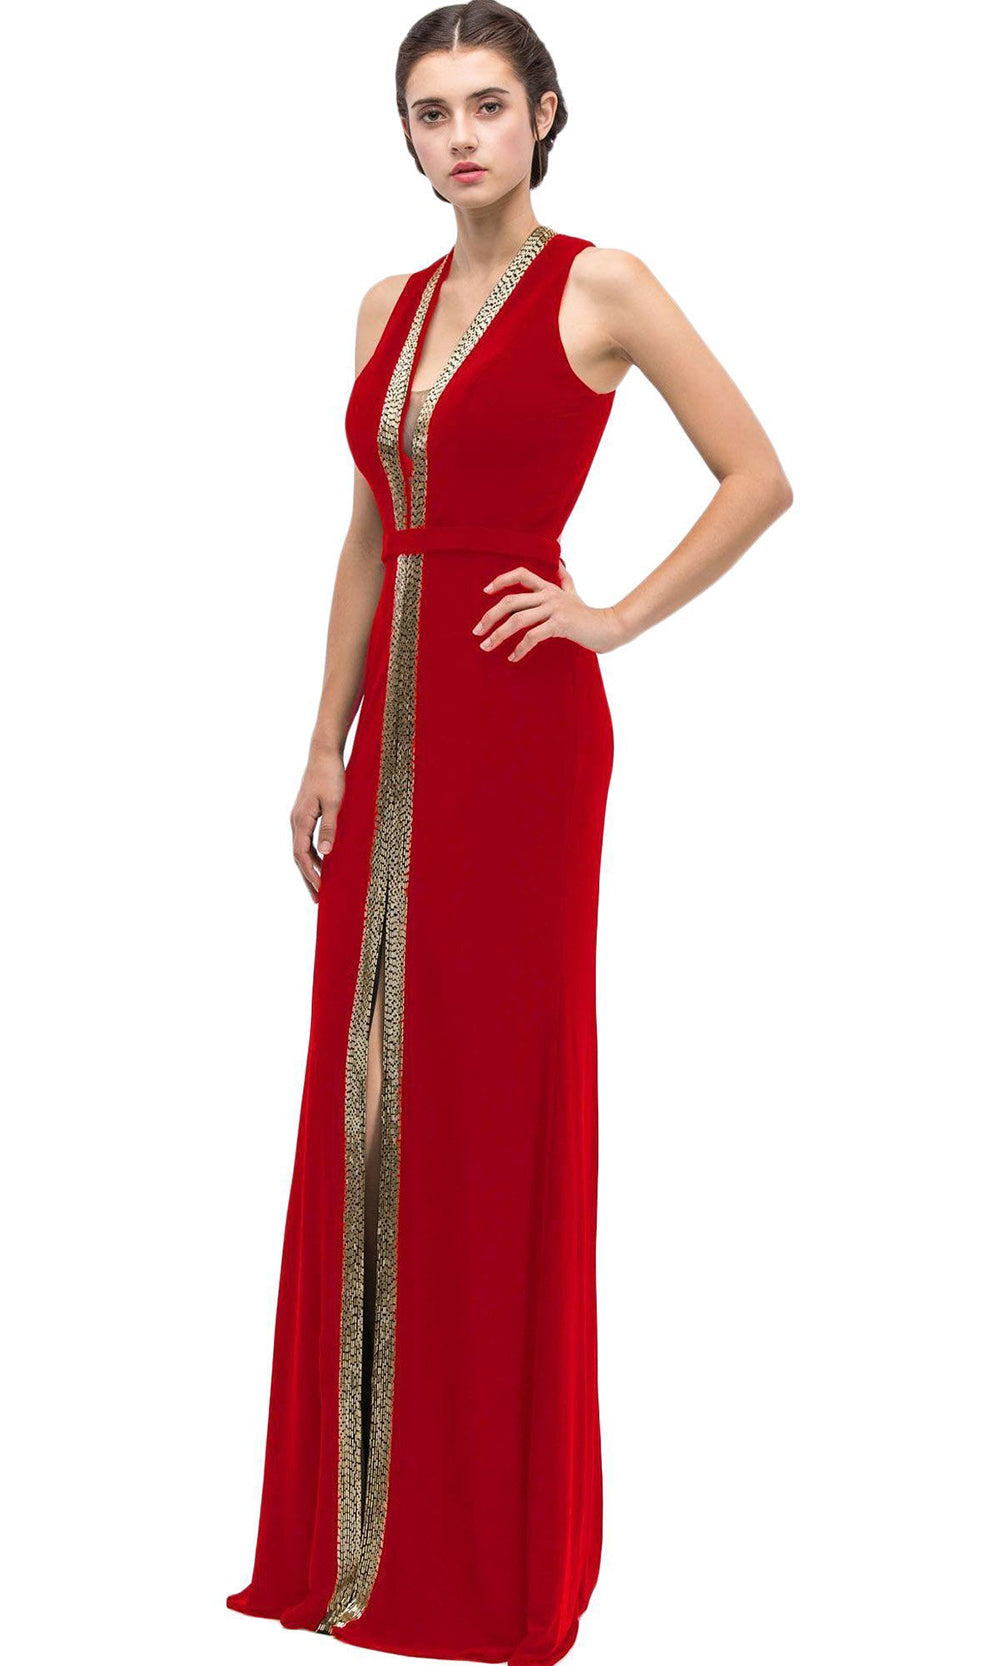 Eureka Fashion - Sleeveless Gold Beading Center Slit Long Gown 6030SC In Red and Gold